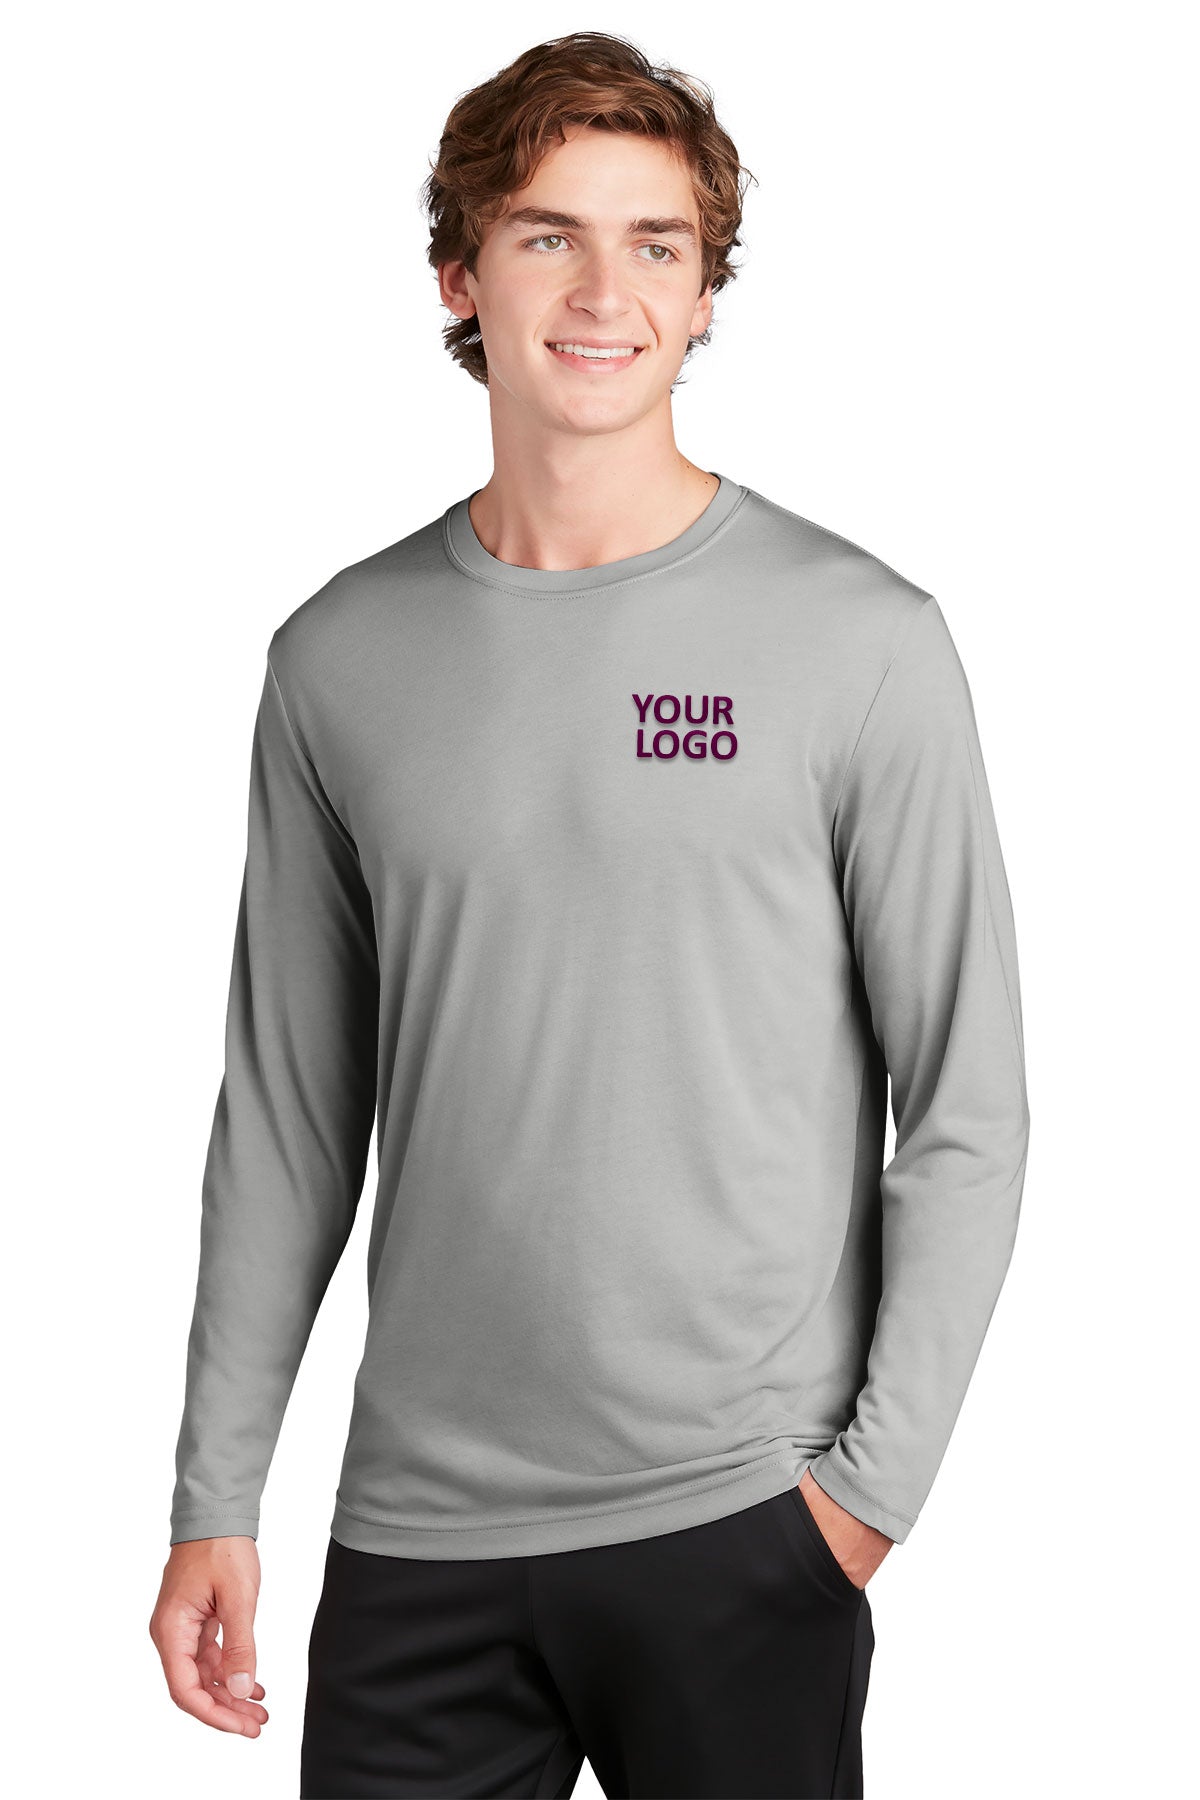 Sport-Tek Long Sleeve PosiCharge Competitor Custom Cotton Touch Tee's, Silver